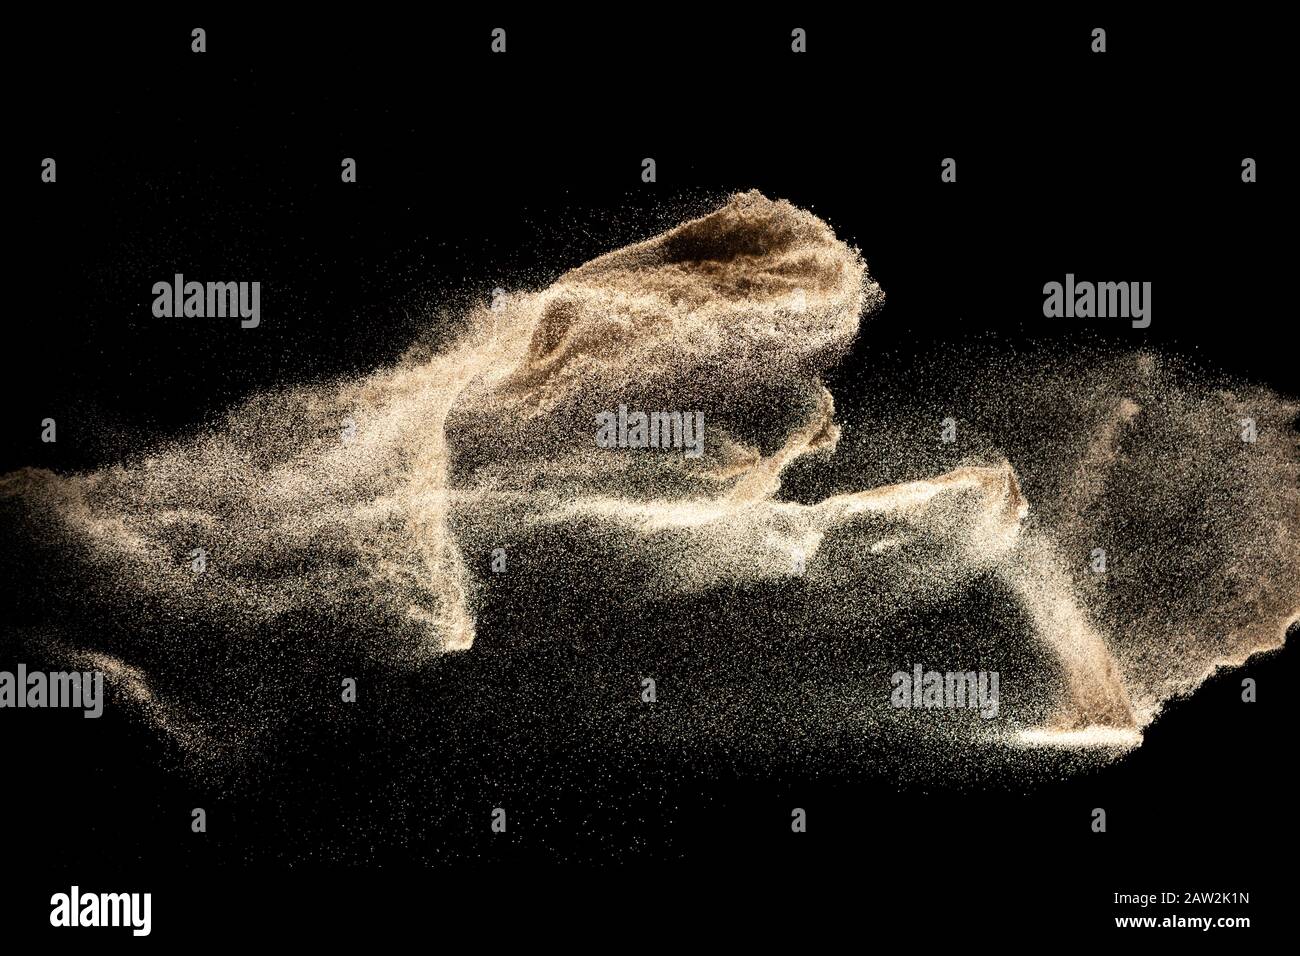 Dry river sand explosion isolated on black background. Abstract sand cloud.Brown colored sand splash. Stock Photo